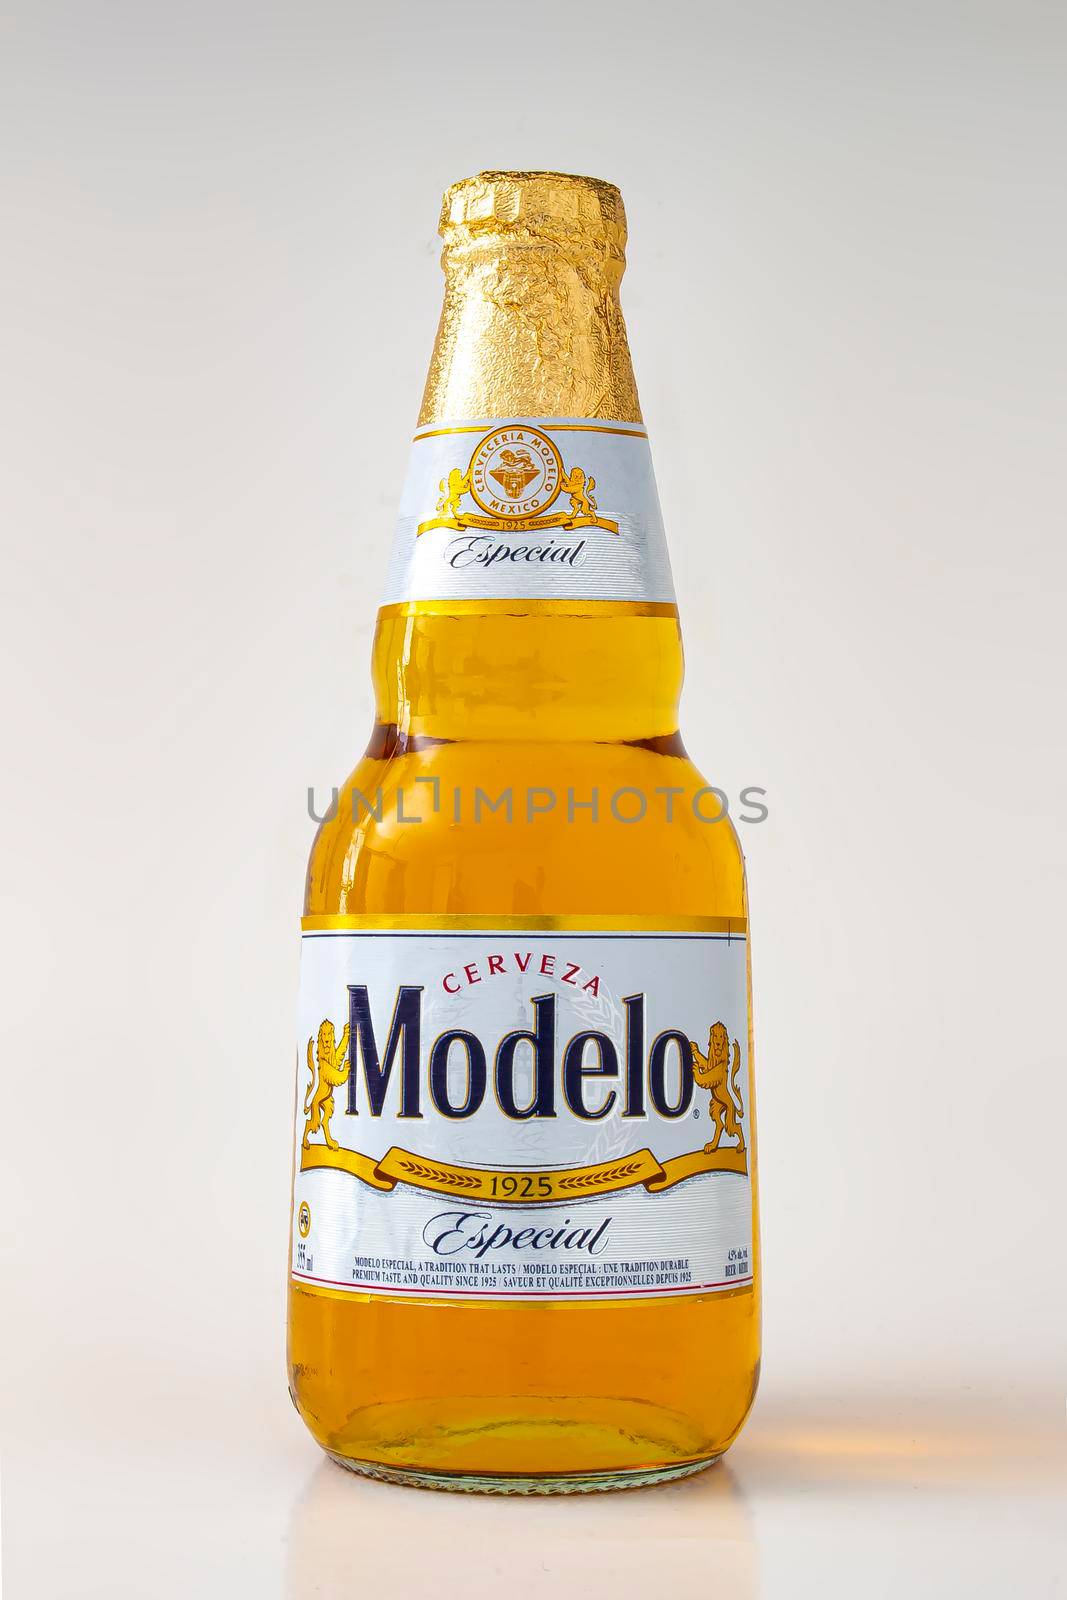 Calgary, Alberta, Canada. May 1, 2020. Modelo Especial beer bottle clear bright yellow colour on a white background